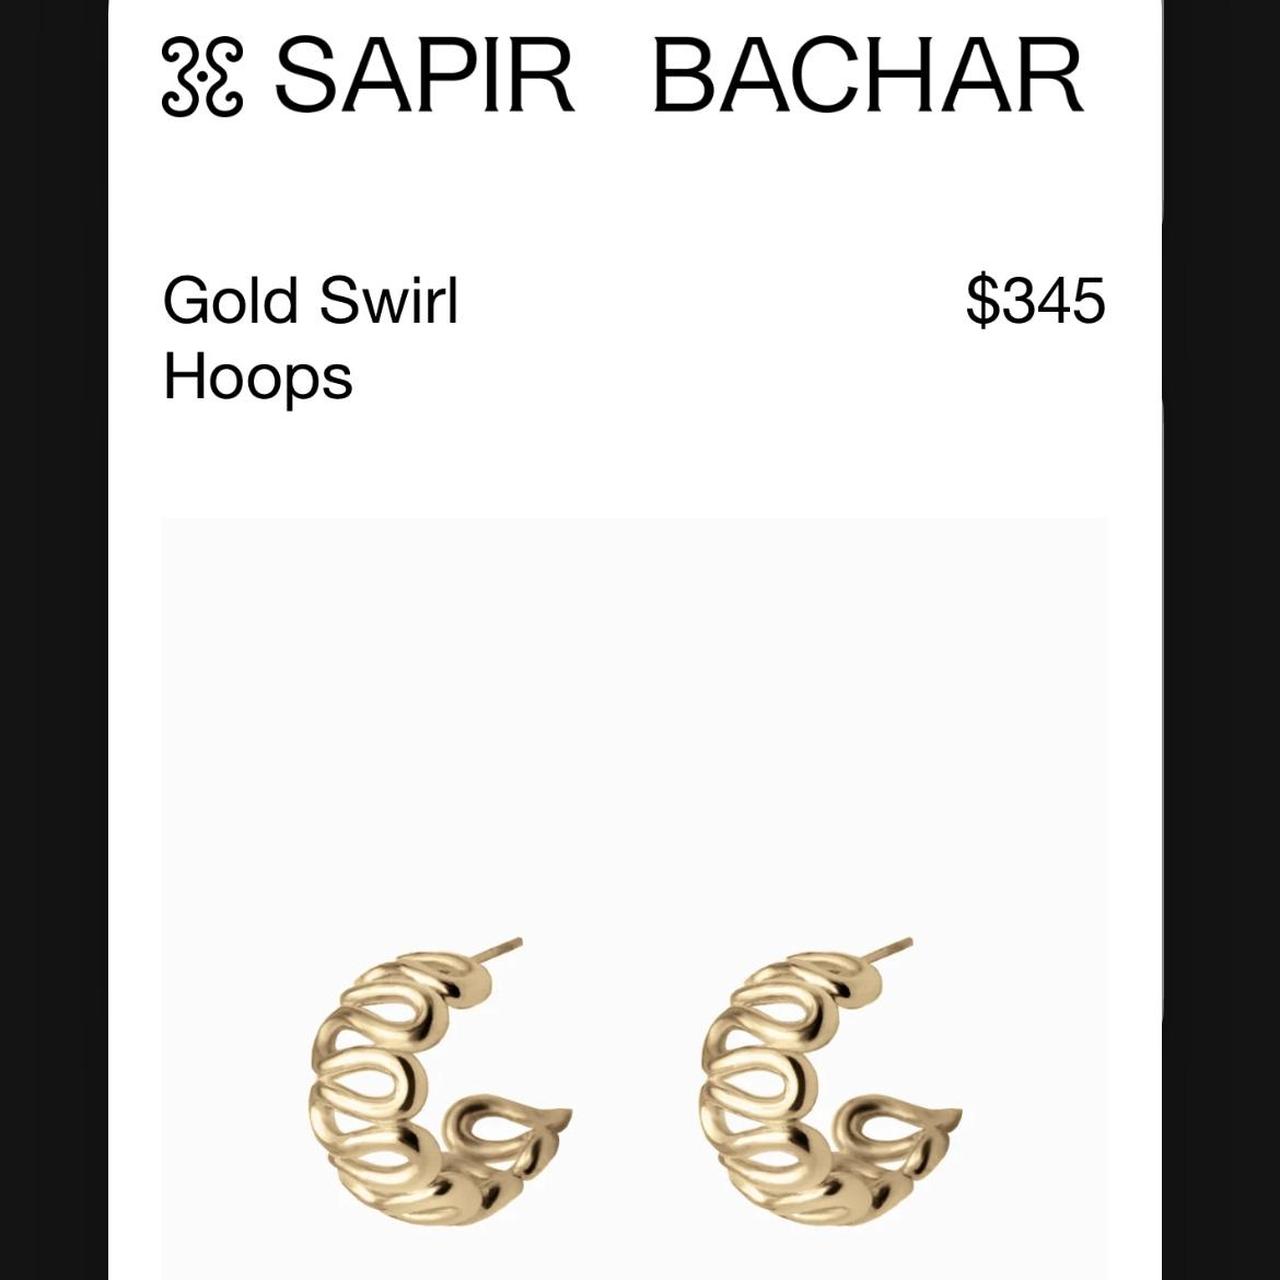 Product Image 2 - Handcrafted #SapirBachar #swirl #goldhoops. Excellent